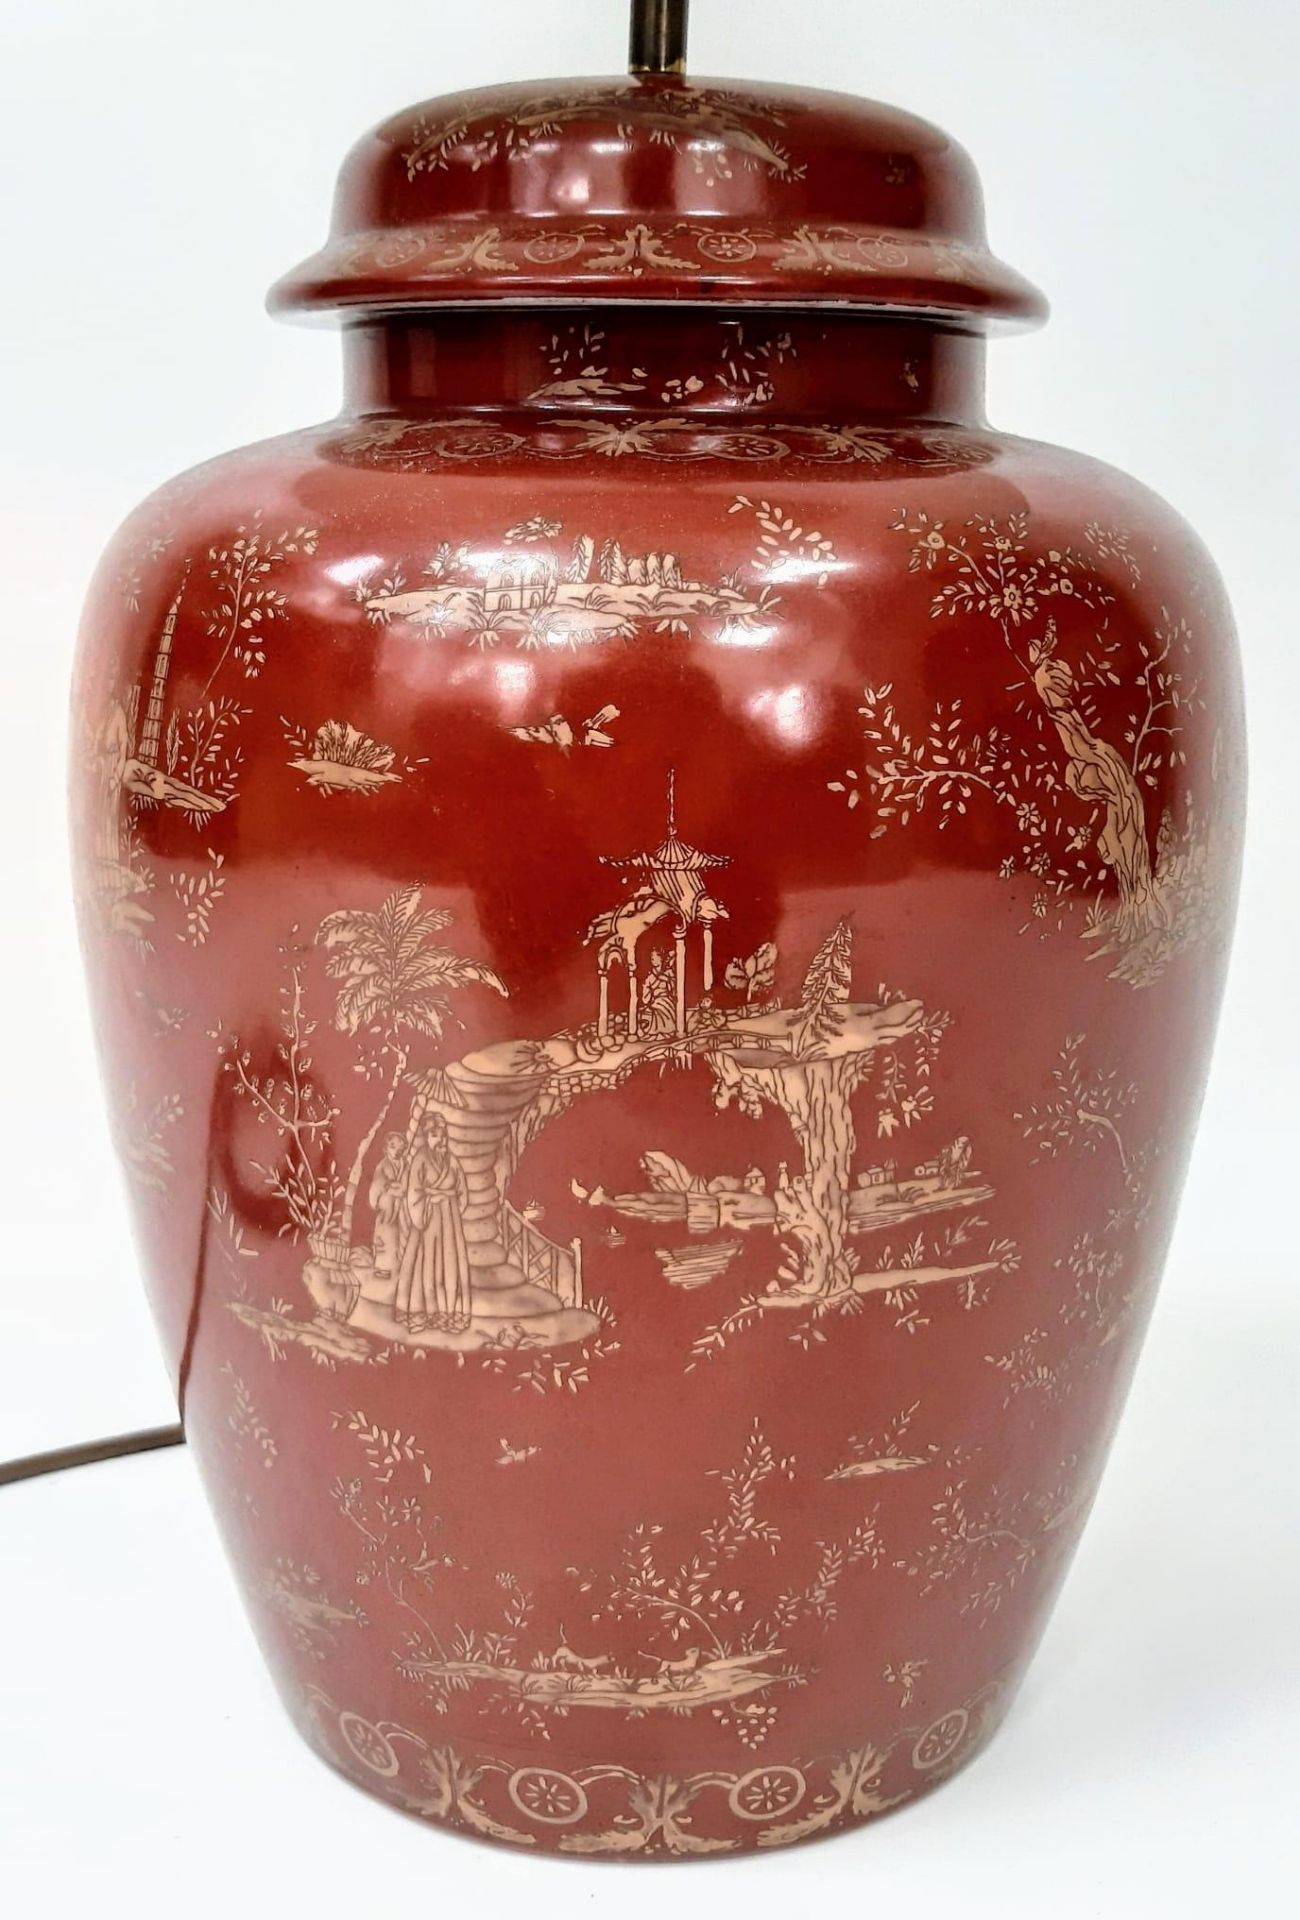 An Antique Chinese Large Vase Lamp Conversion. Wonderful red glaze with decorative gilded - Image 3 of 7